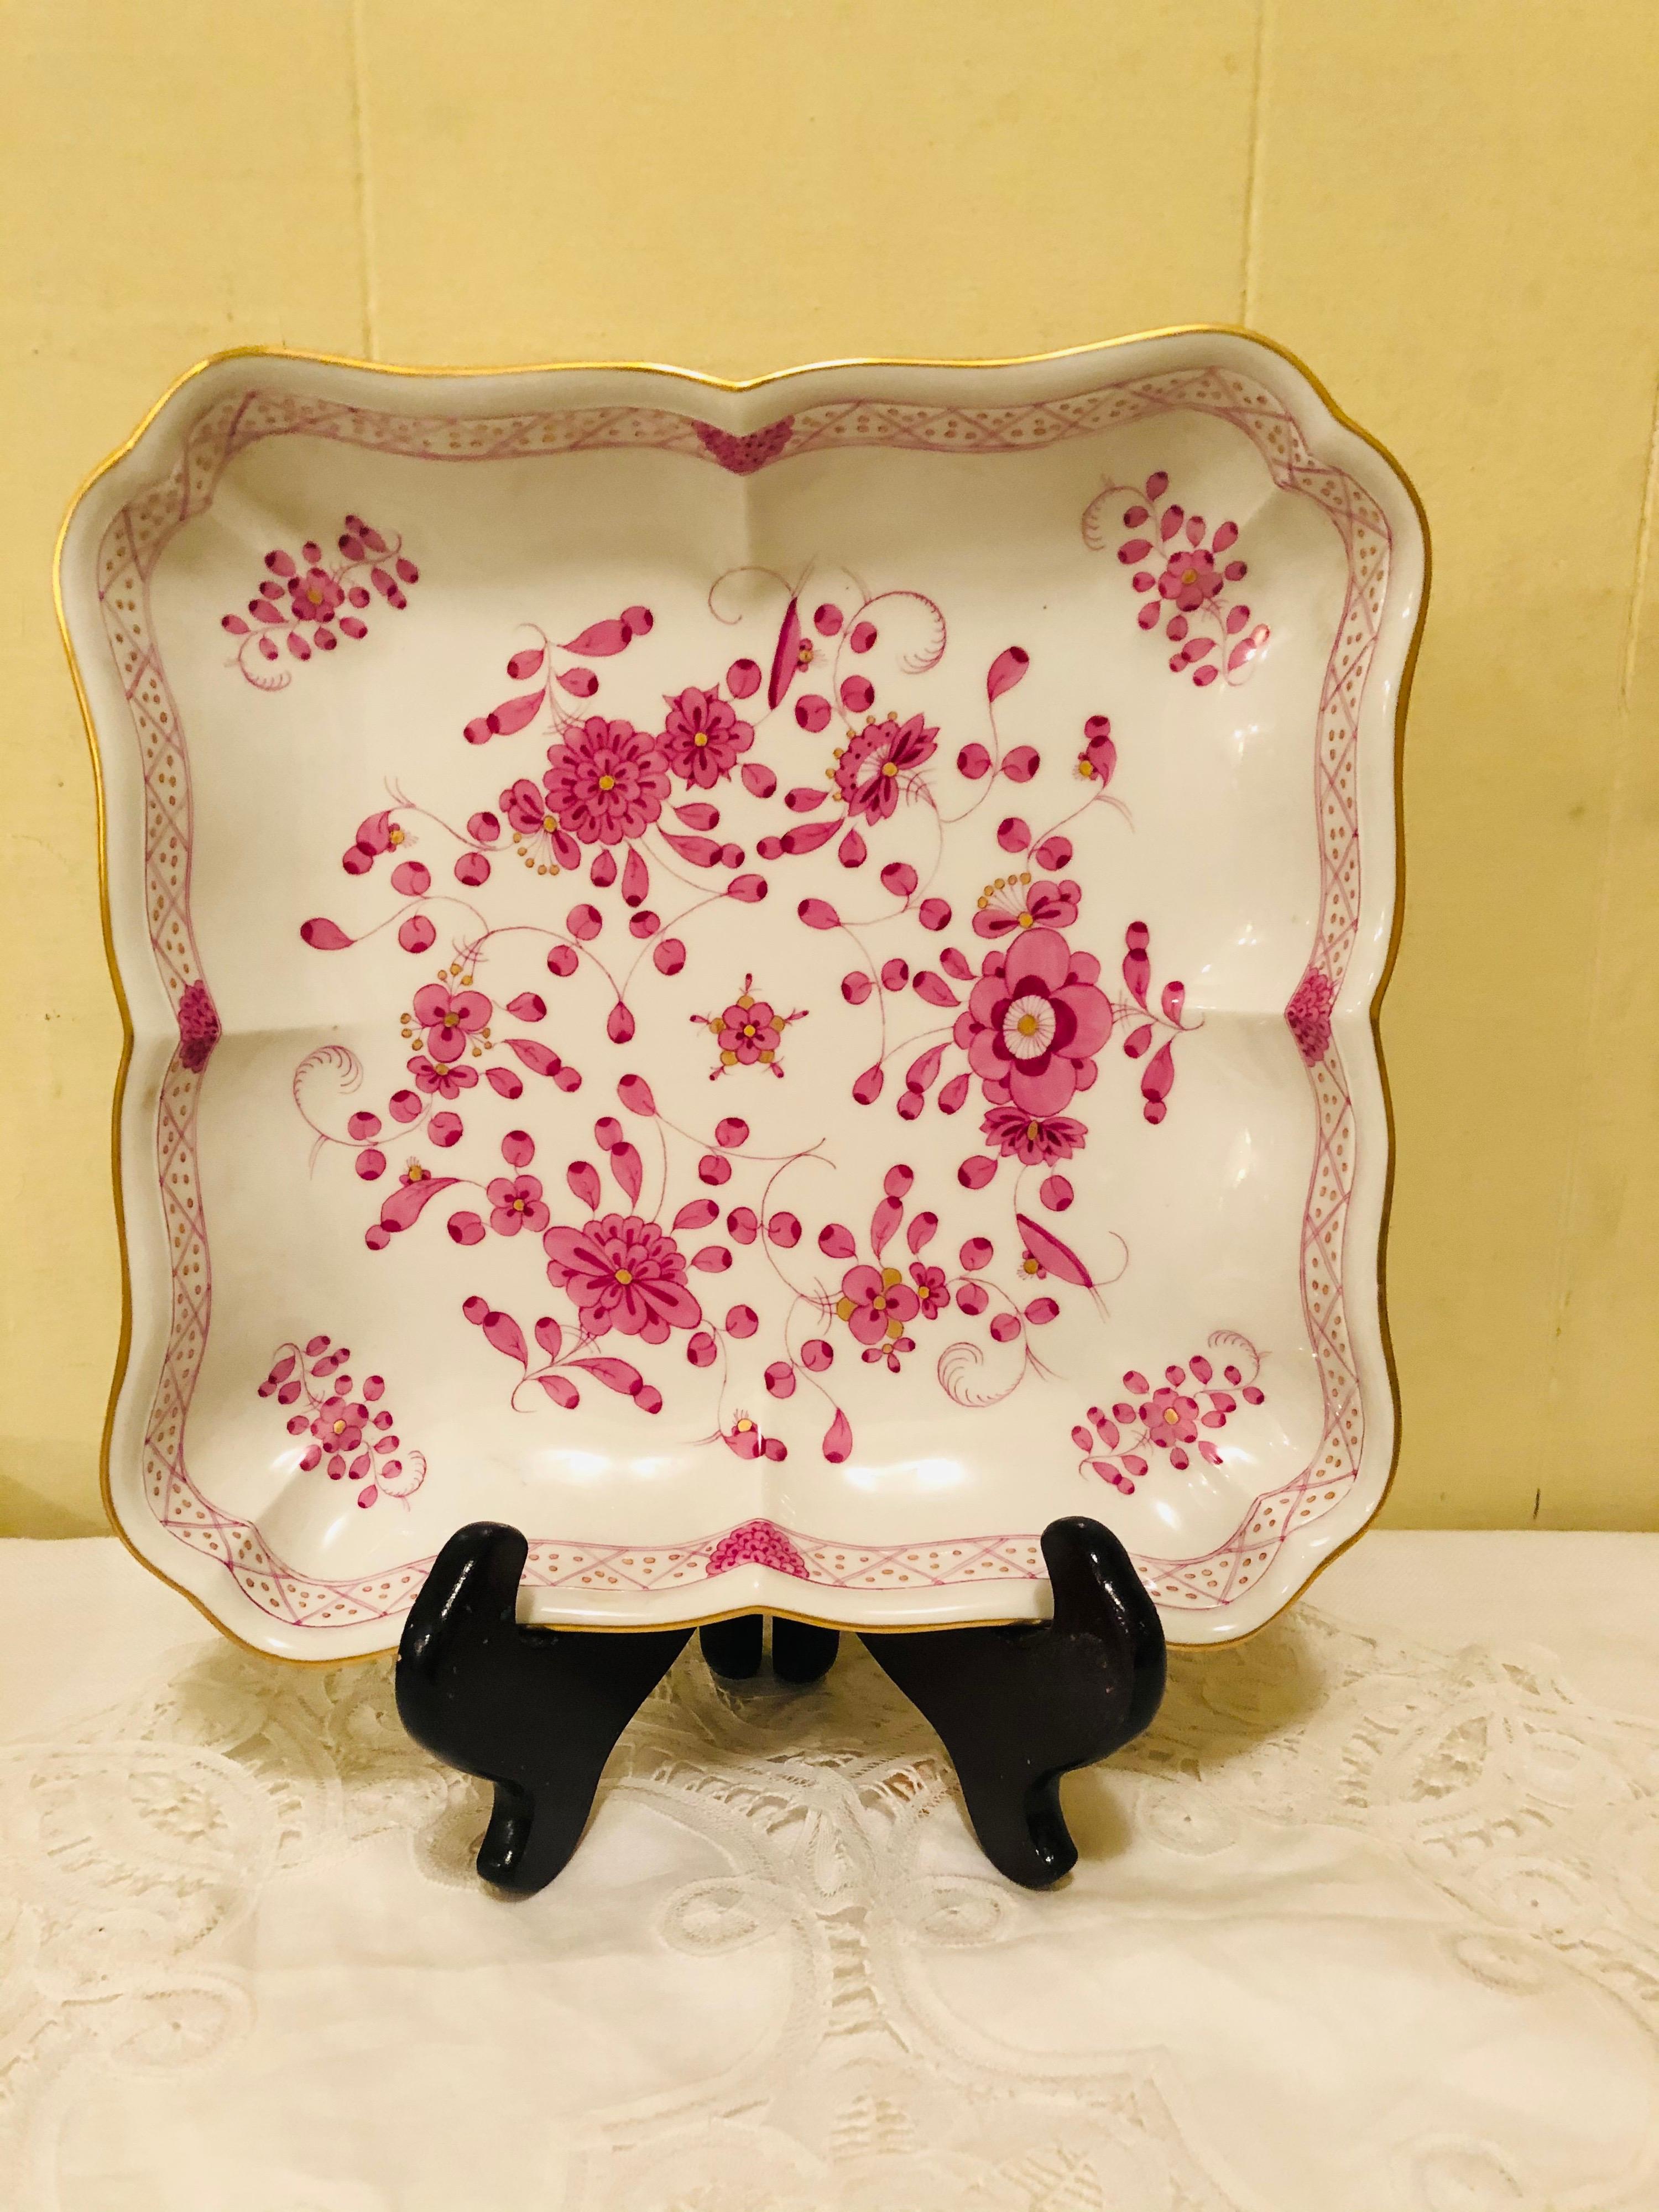 I would like to offer you this lovely Meissen purple Indian bowl in this unusual square shape.  It has detailed paintings of pink flowers with some purple and gold accents on a white ground. The detail of the painting on this bowl is beautifully